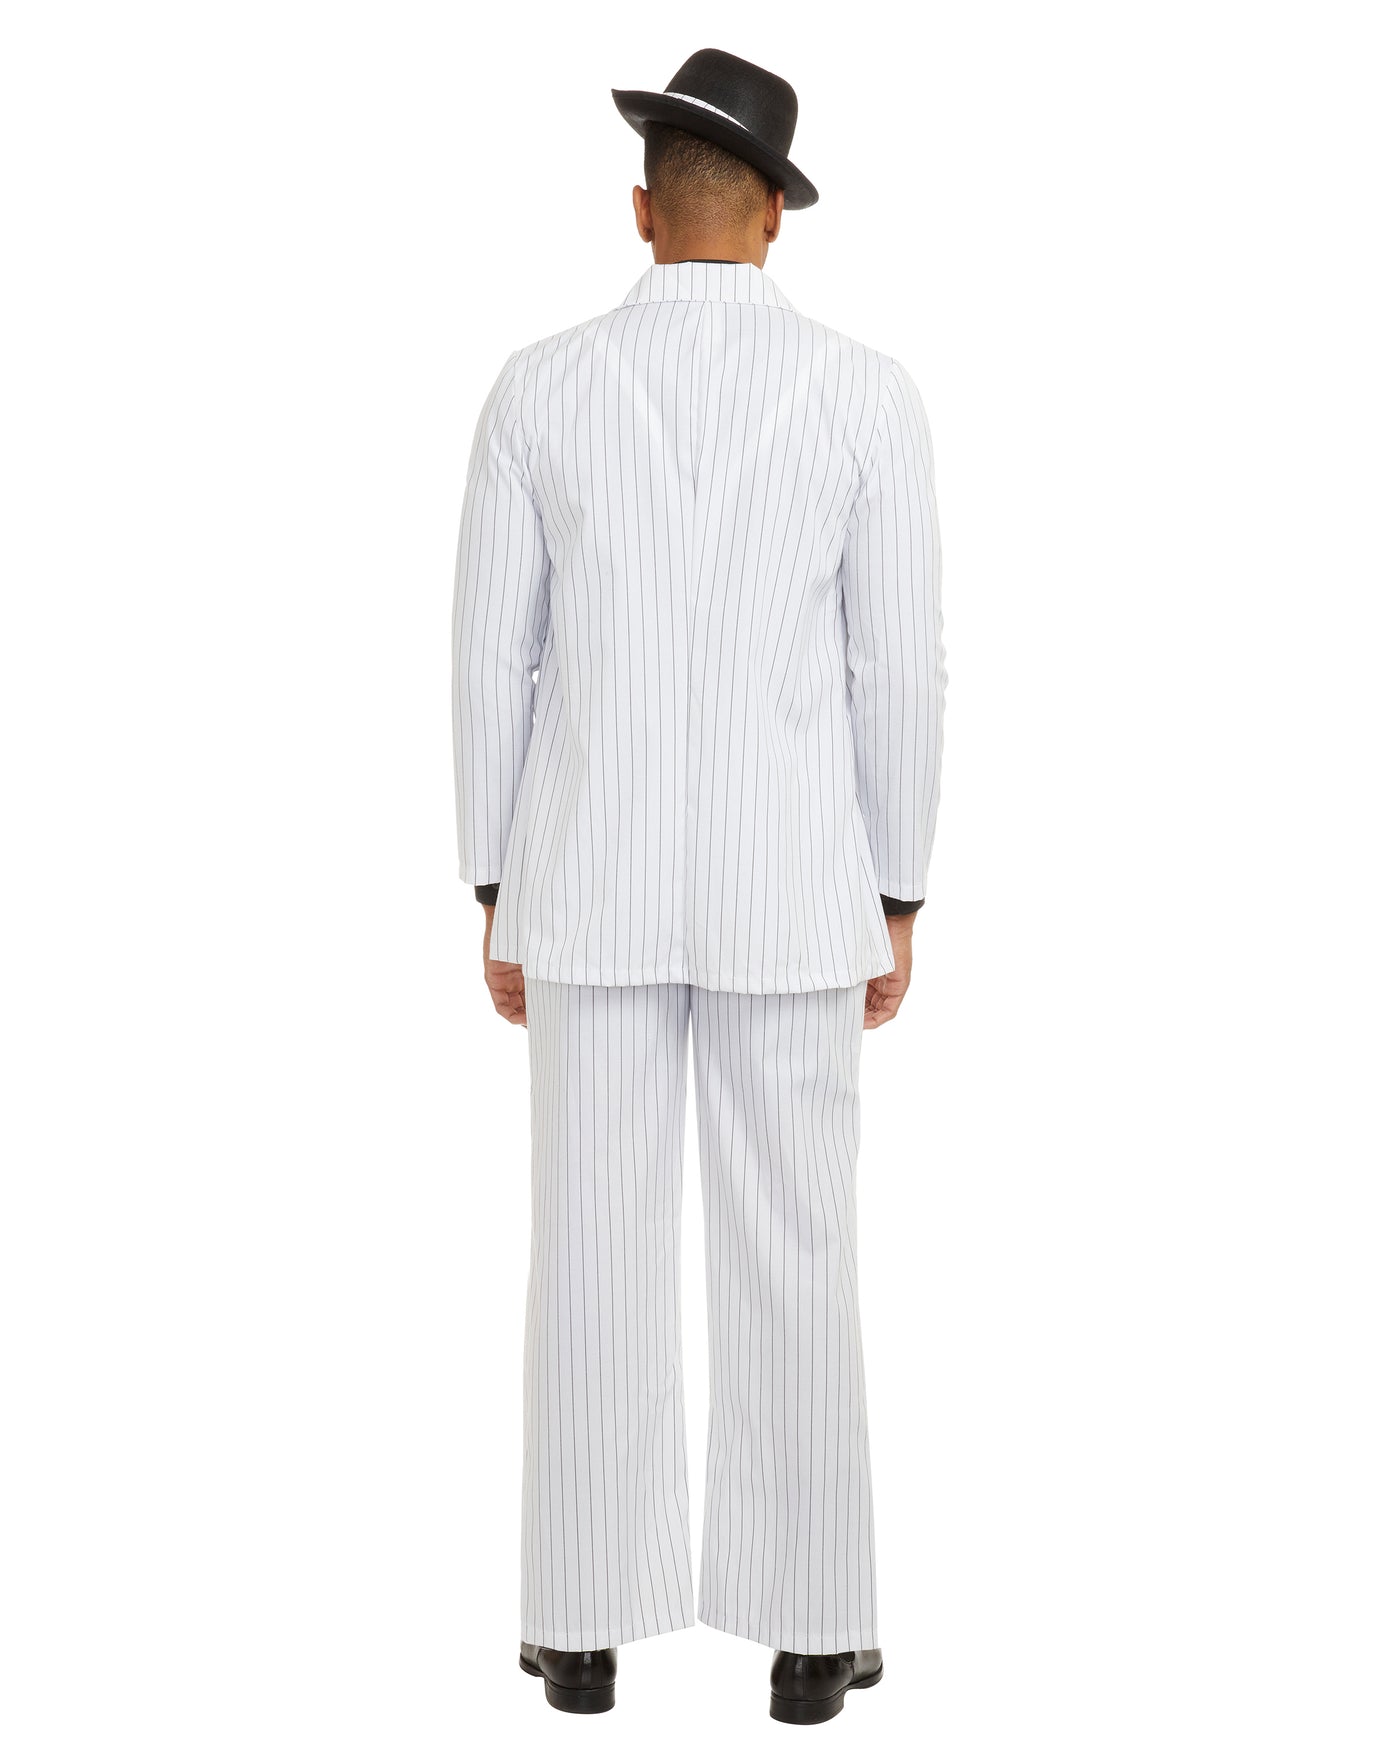 Zoot Suit Riot – Dreamgirl Costume